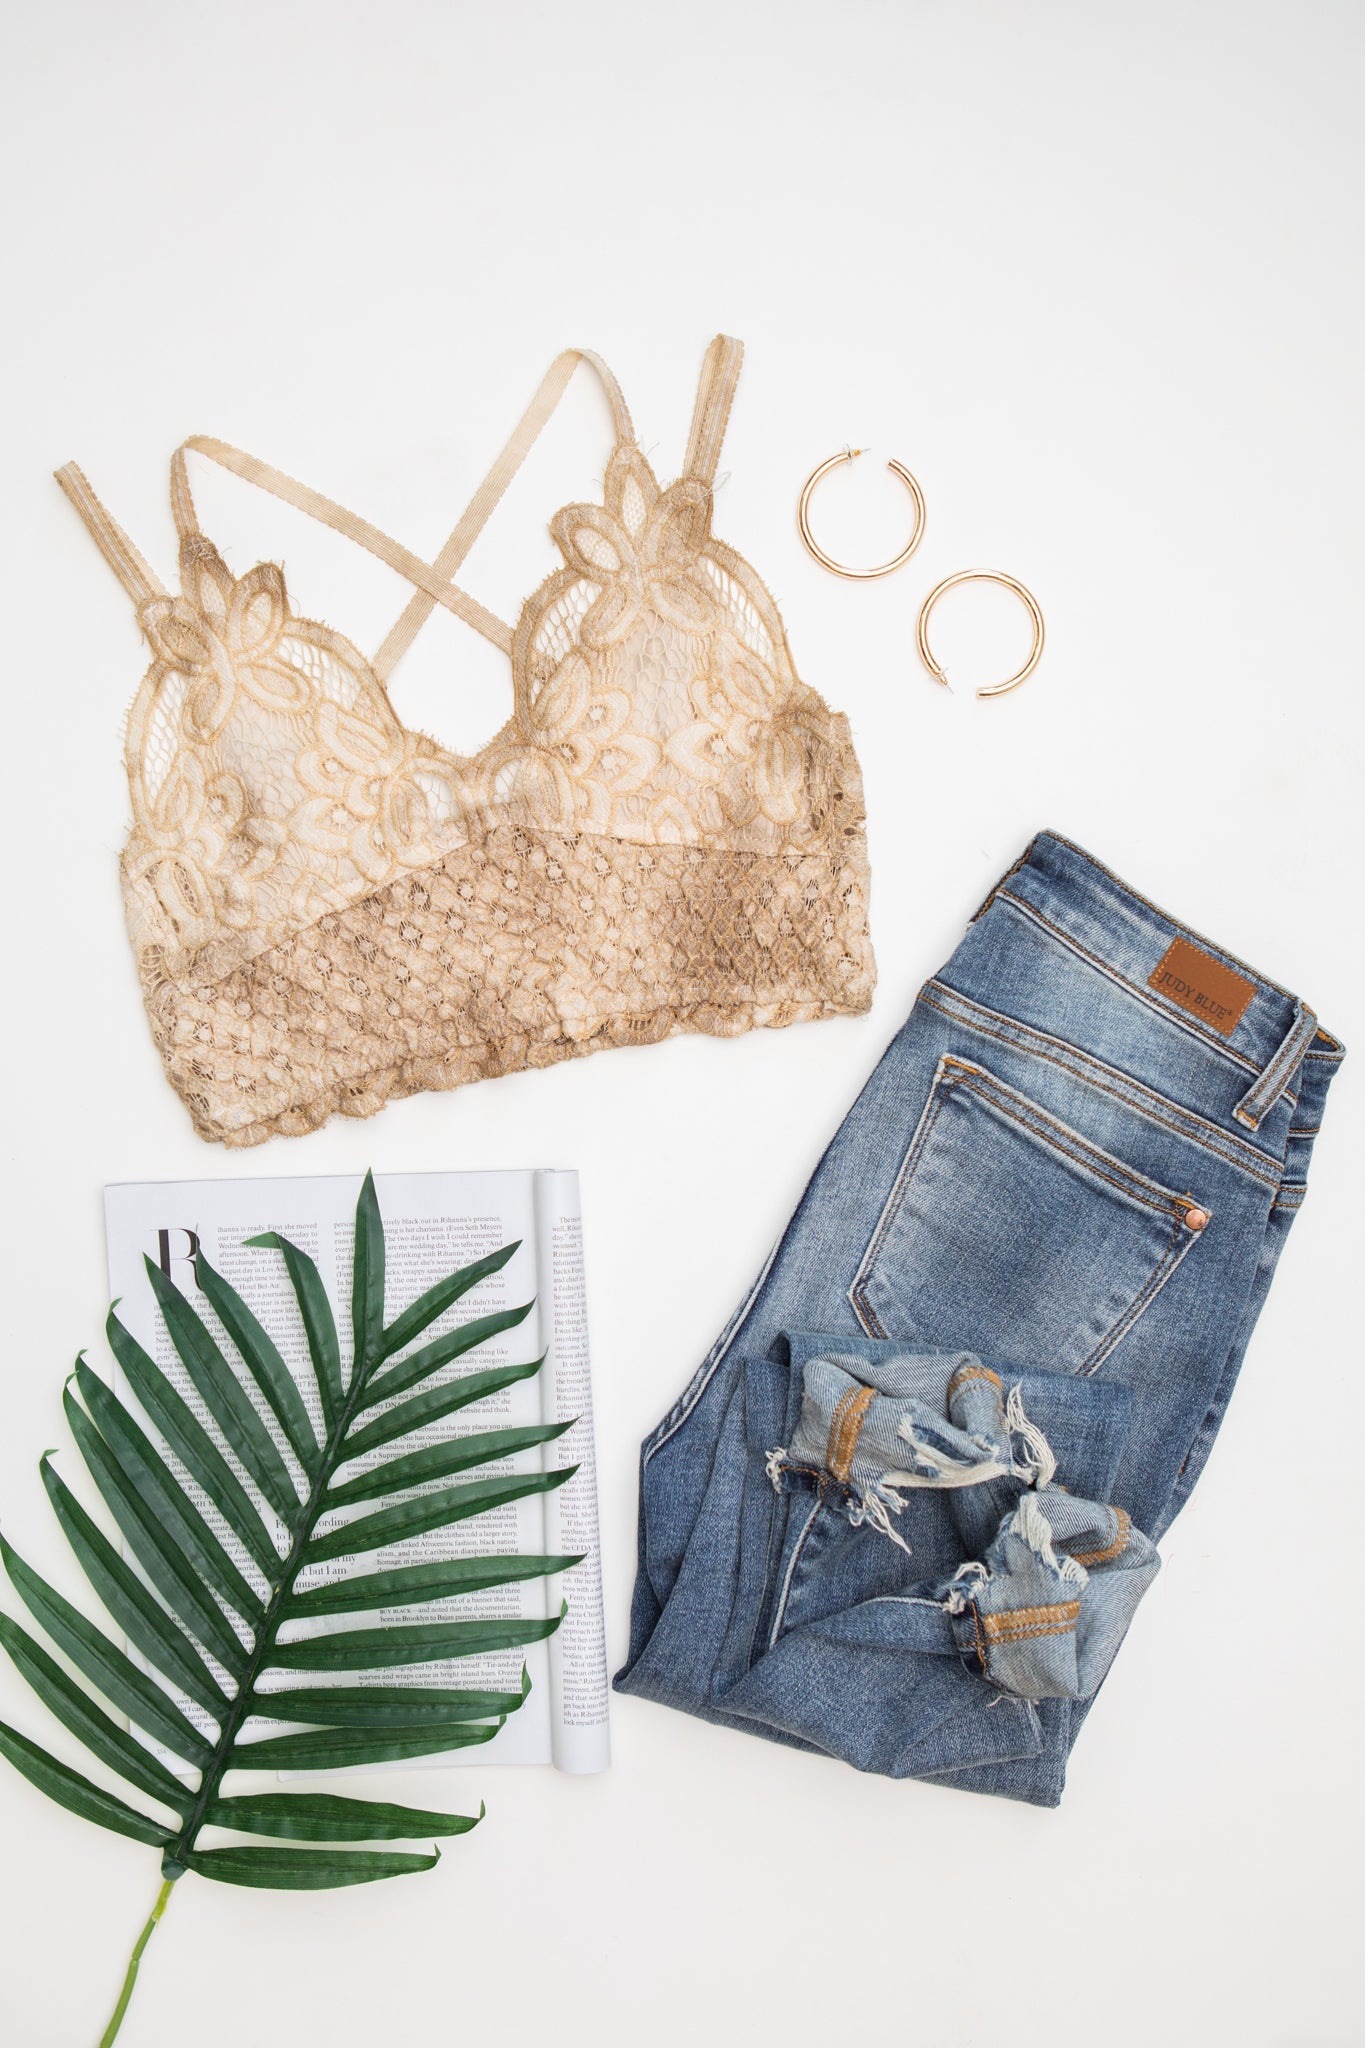 This beautiful lace bralette is perfect for layering. This lightweight, medium support bralette brings a feminine touch to any outfit. Pair it with a t-shirt or oversized sweater for a comfortable and flirty look! S - L